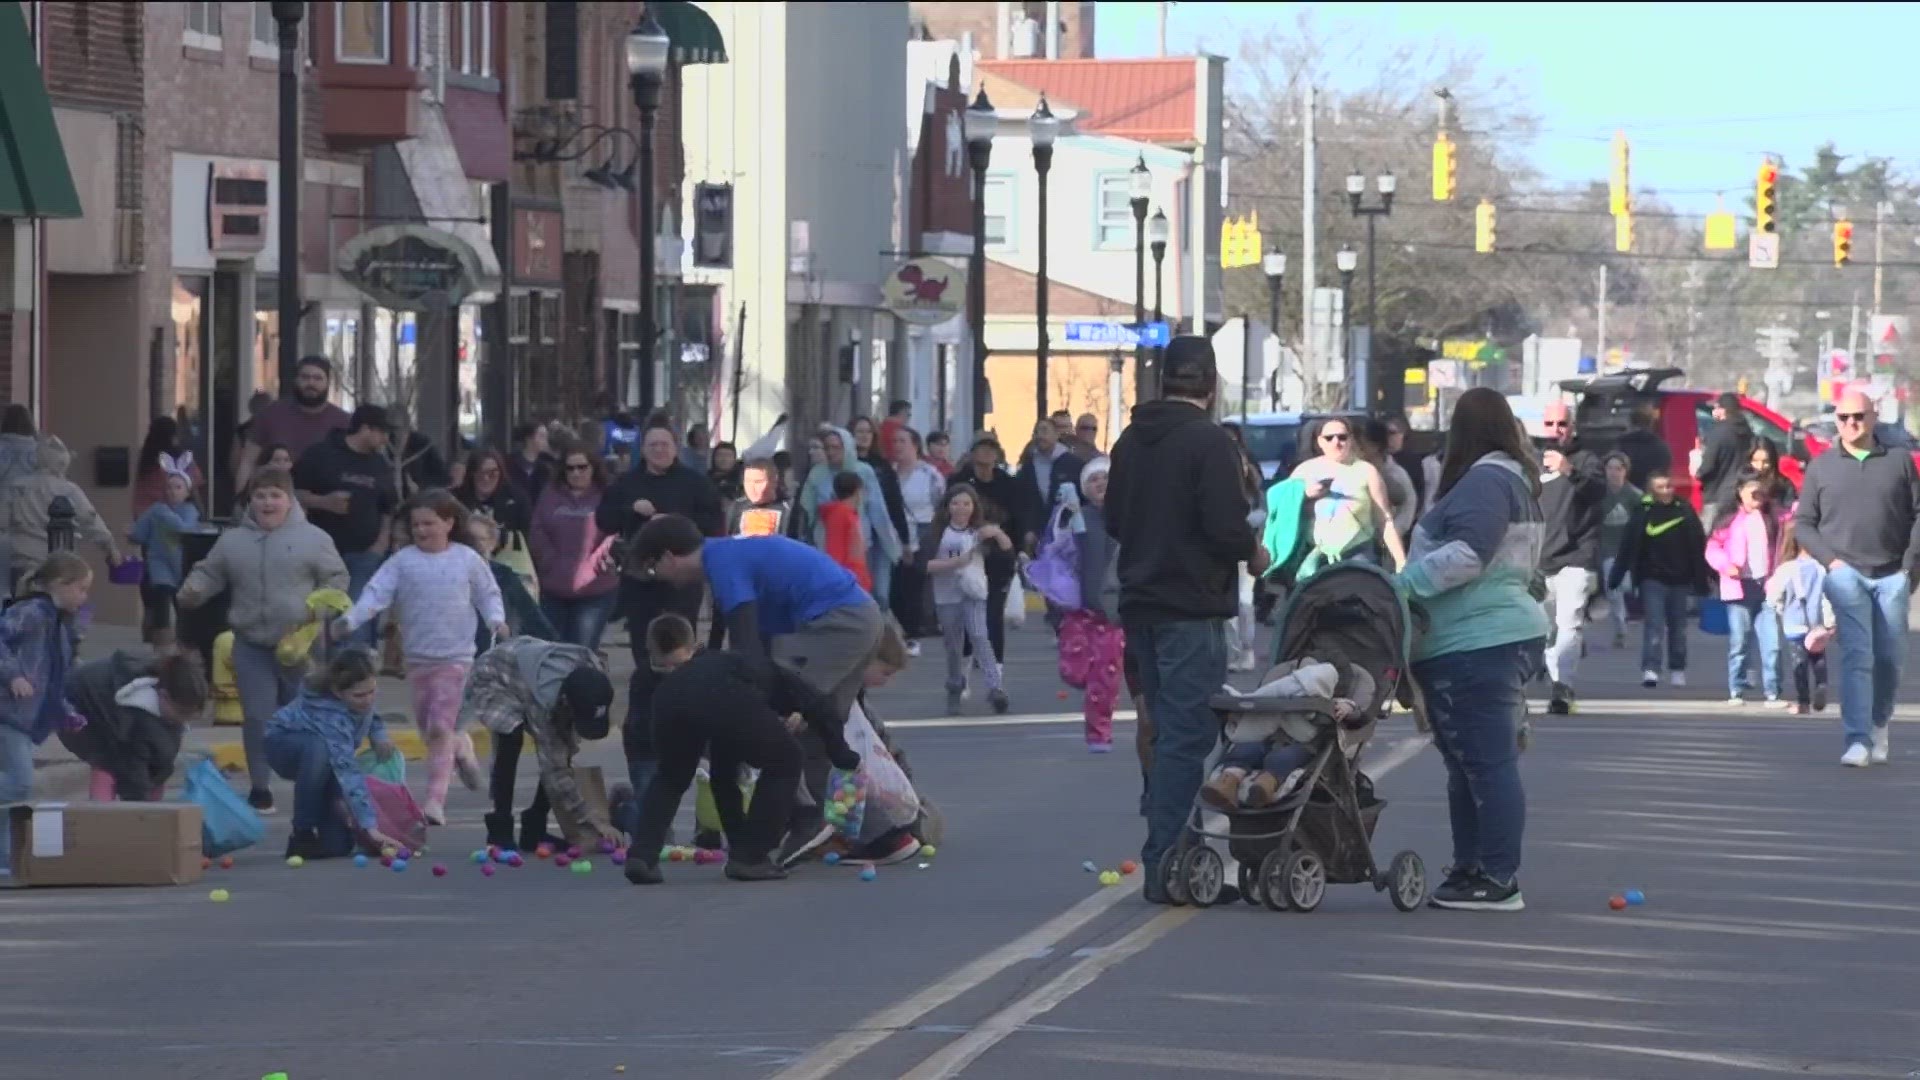 Thousands of eggs were hidden throughout the four blocks of downtown Adrian on Friday. Adults also participated hunted for 17 eggs in downtown businesses.